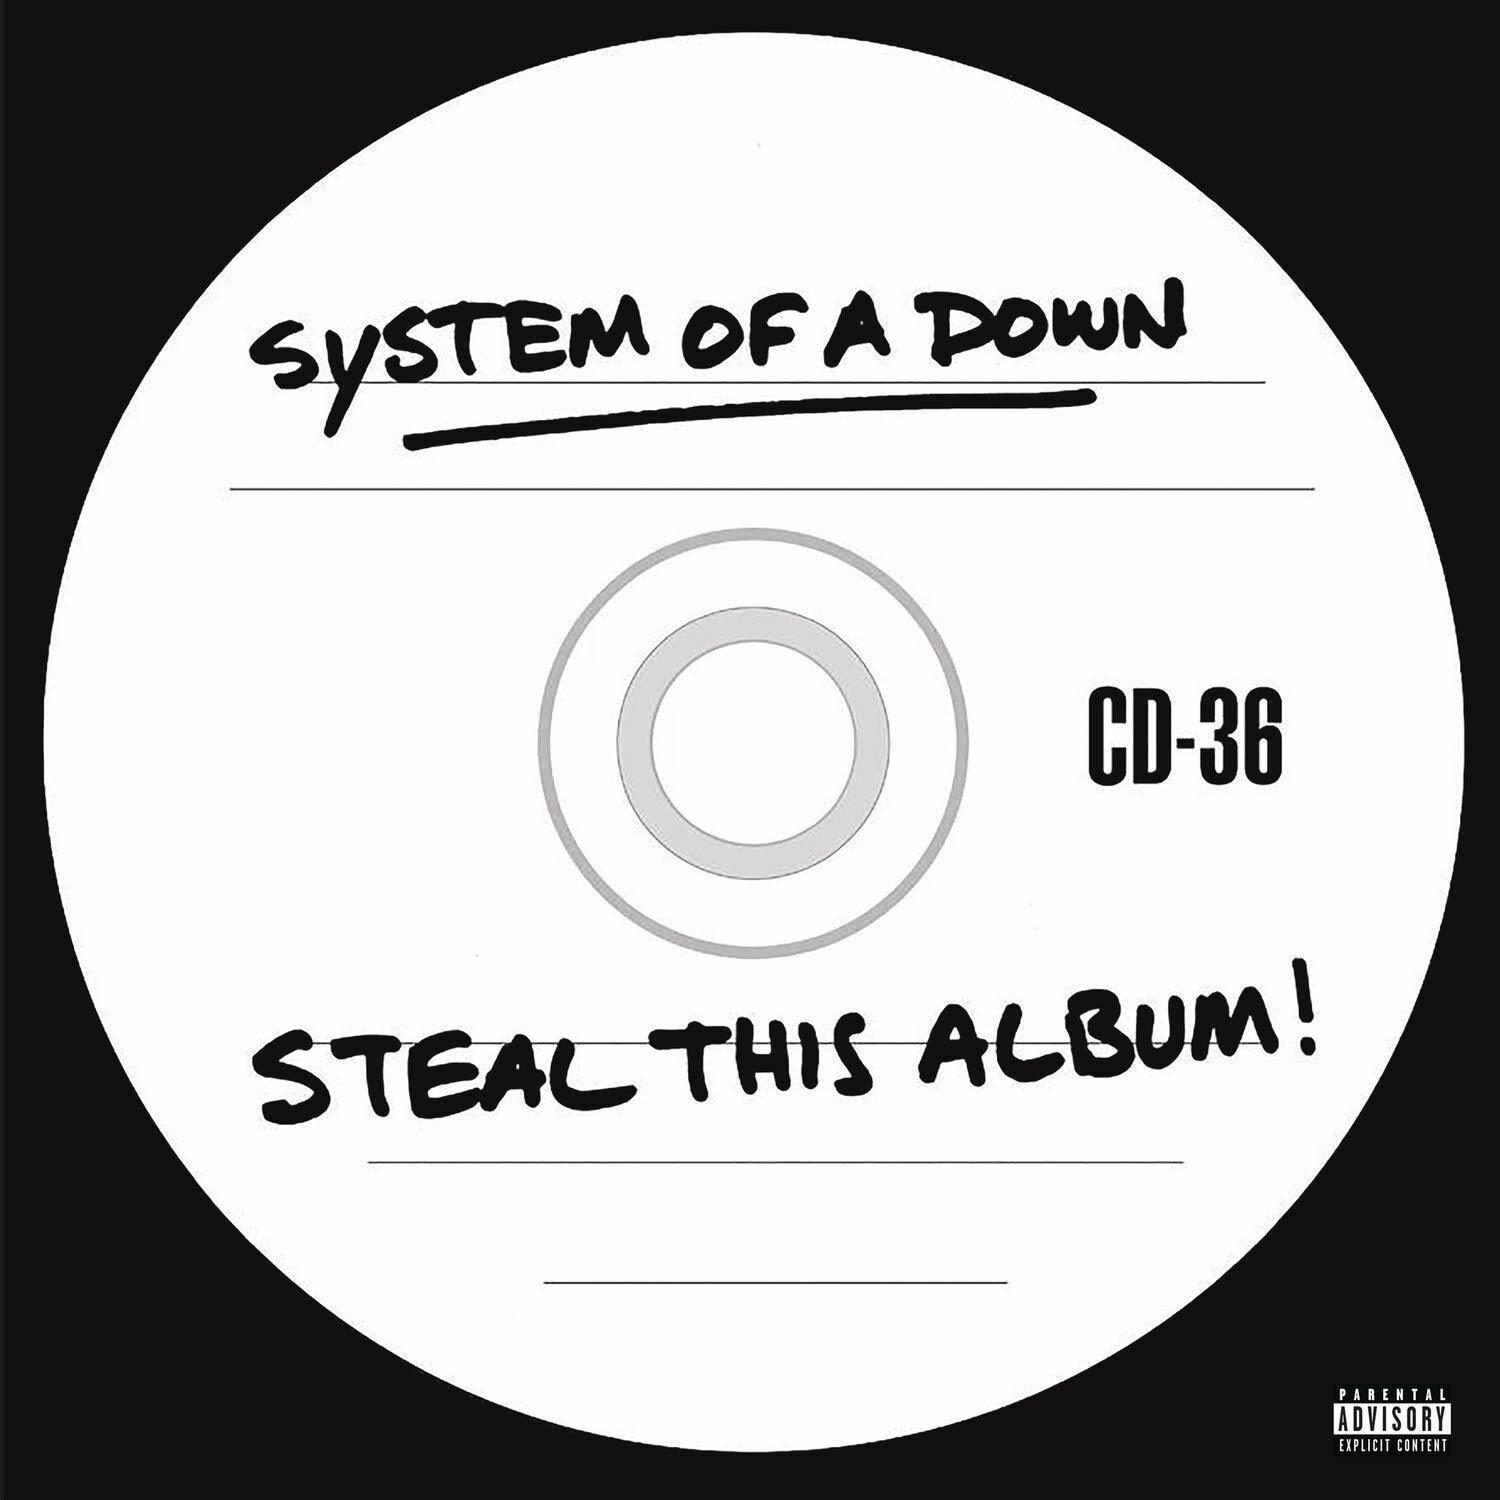 Винил 12" (LP) System Of A Down System Of A Down Steal This Album! (2LP)